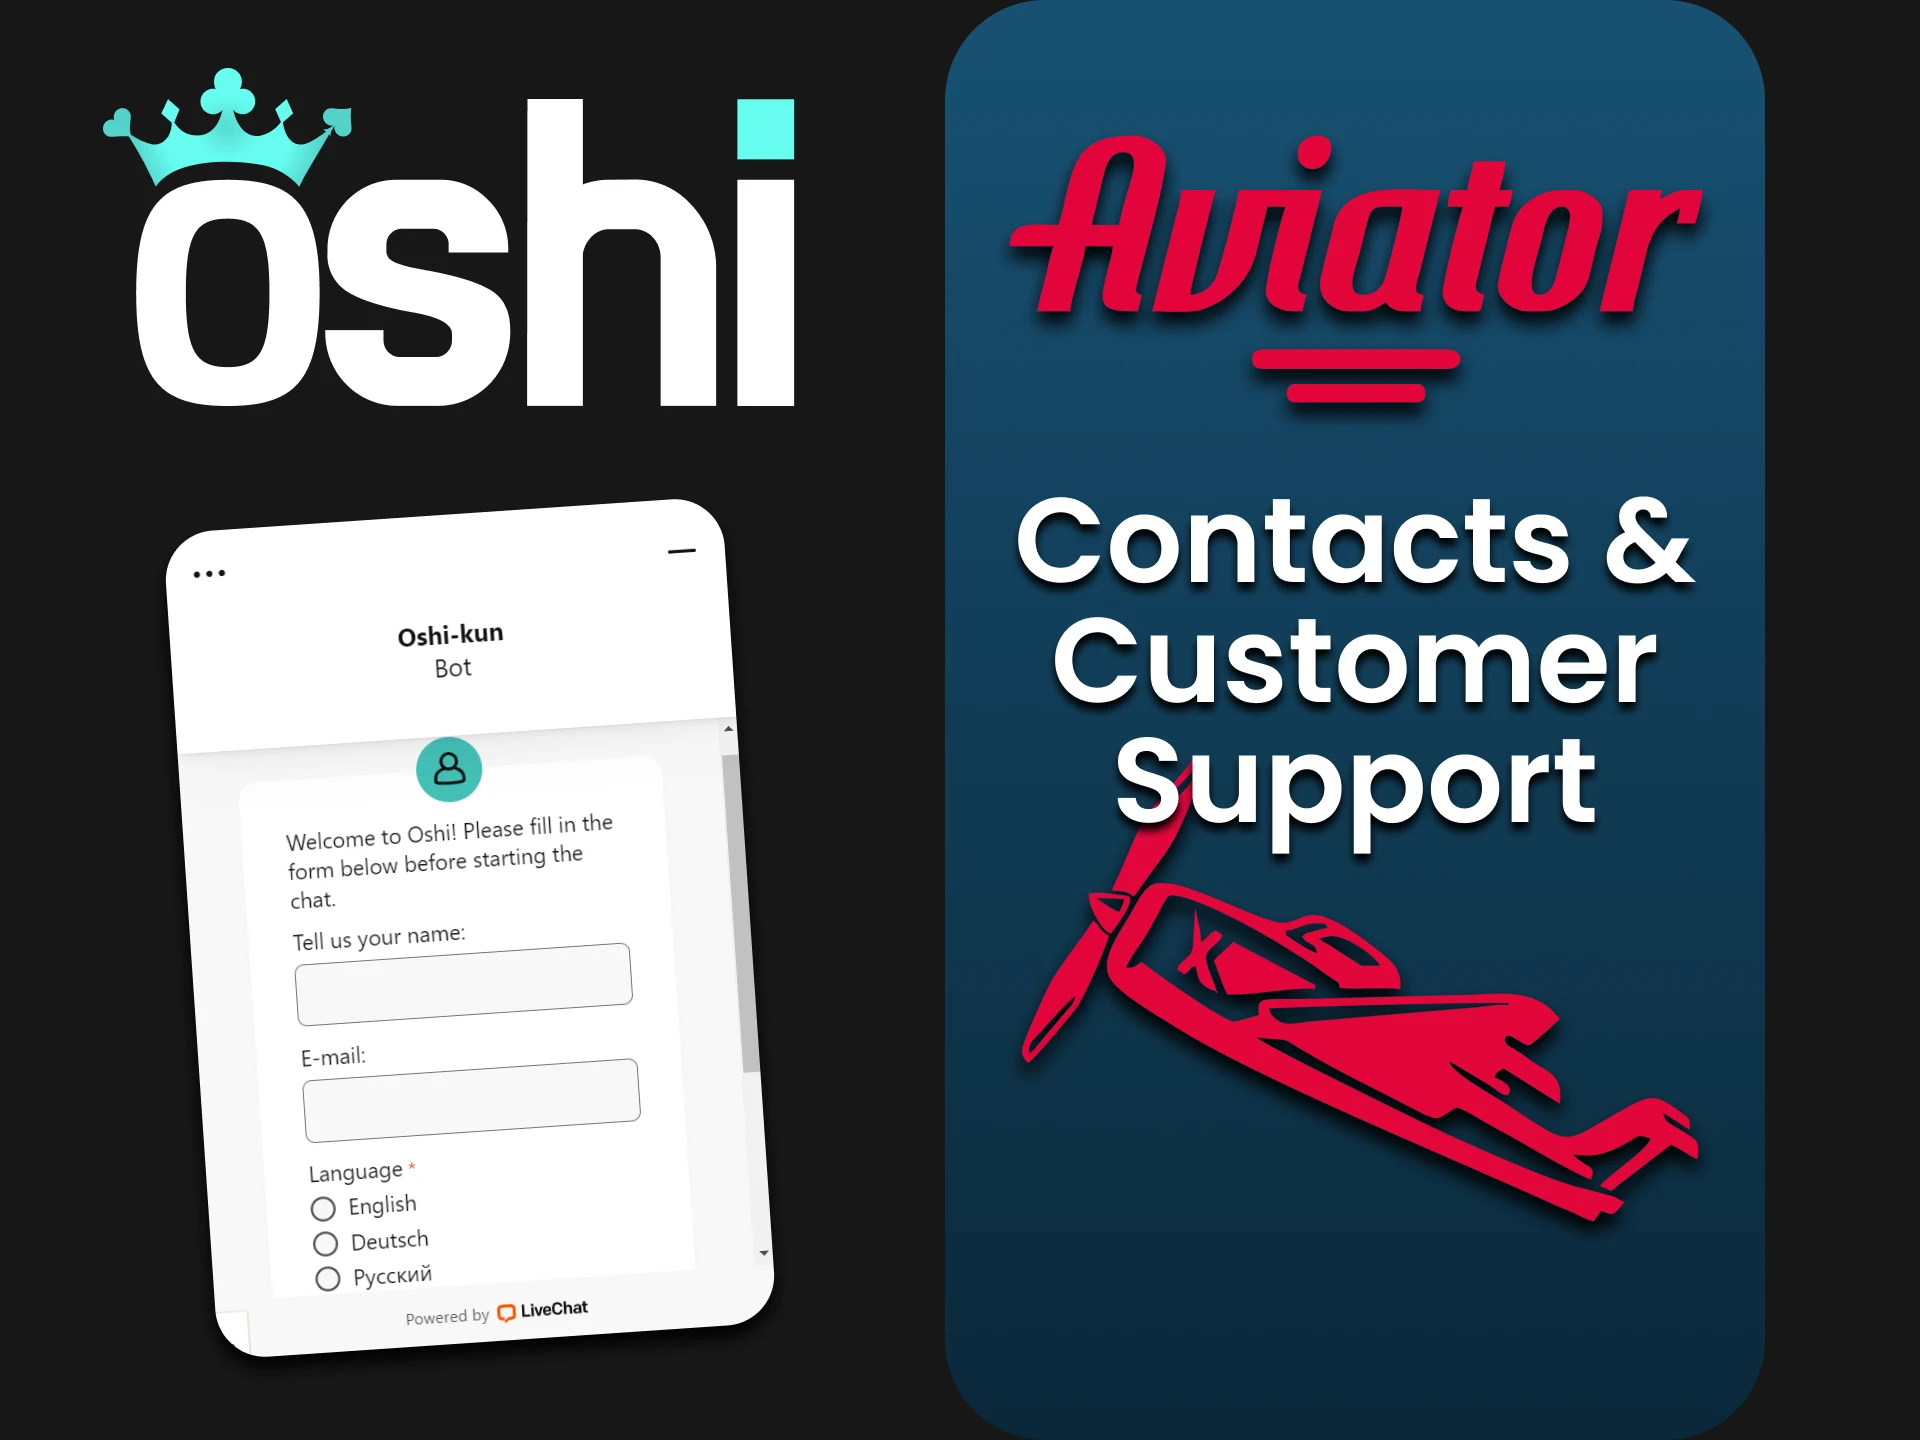 We will tell you how to contact the support team at Oshi Casino for the Aviator game.